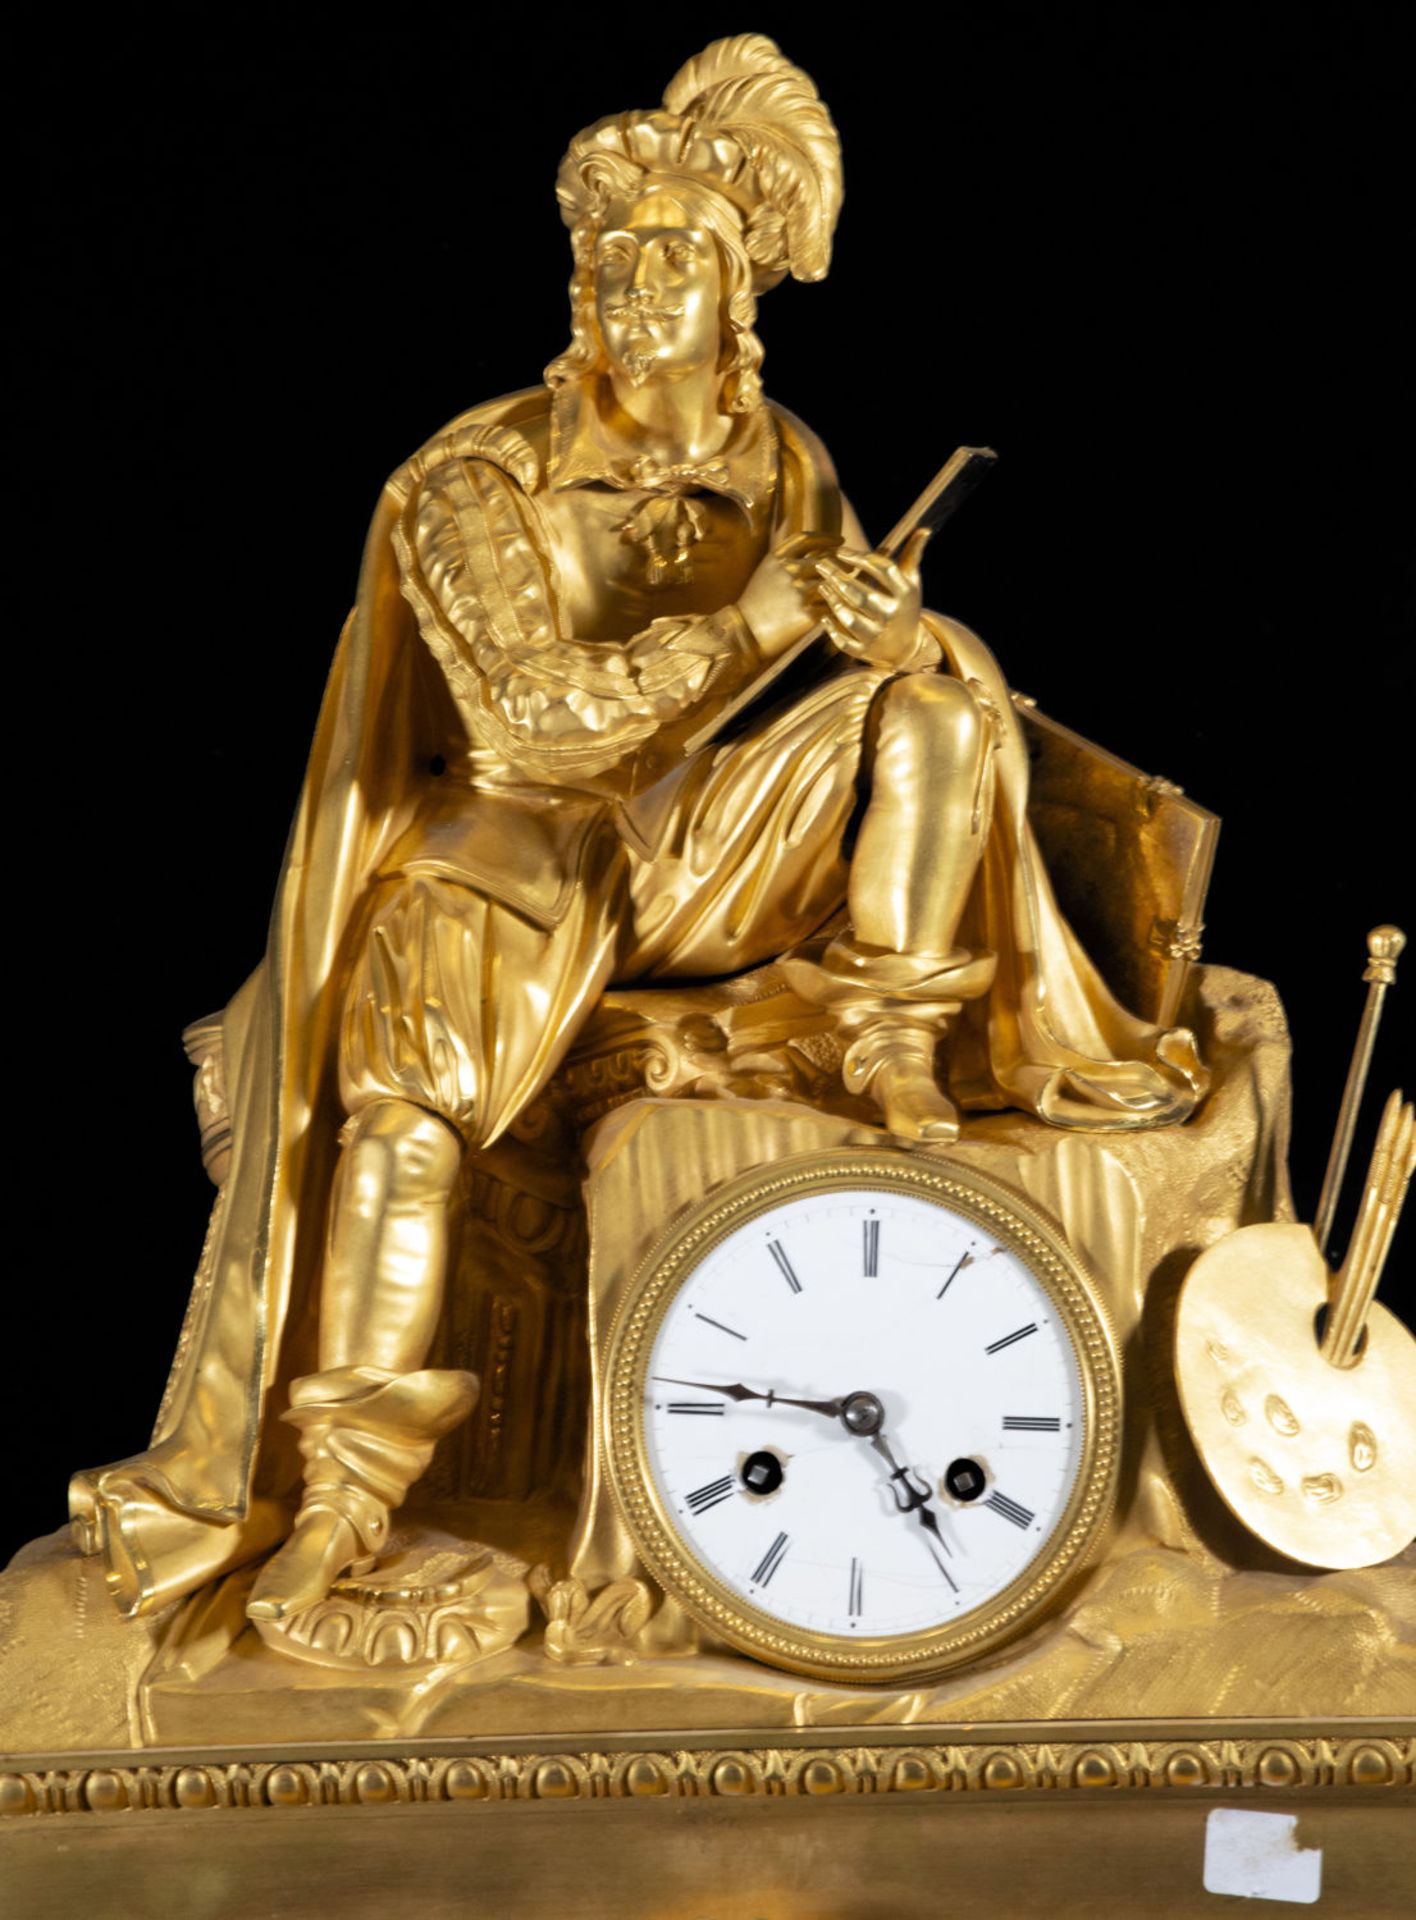 Large Empire table clock with the motif of Michelangelo Buonarroti, 19th century French school - Image 2 of 8